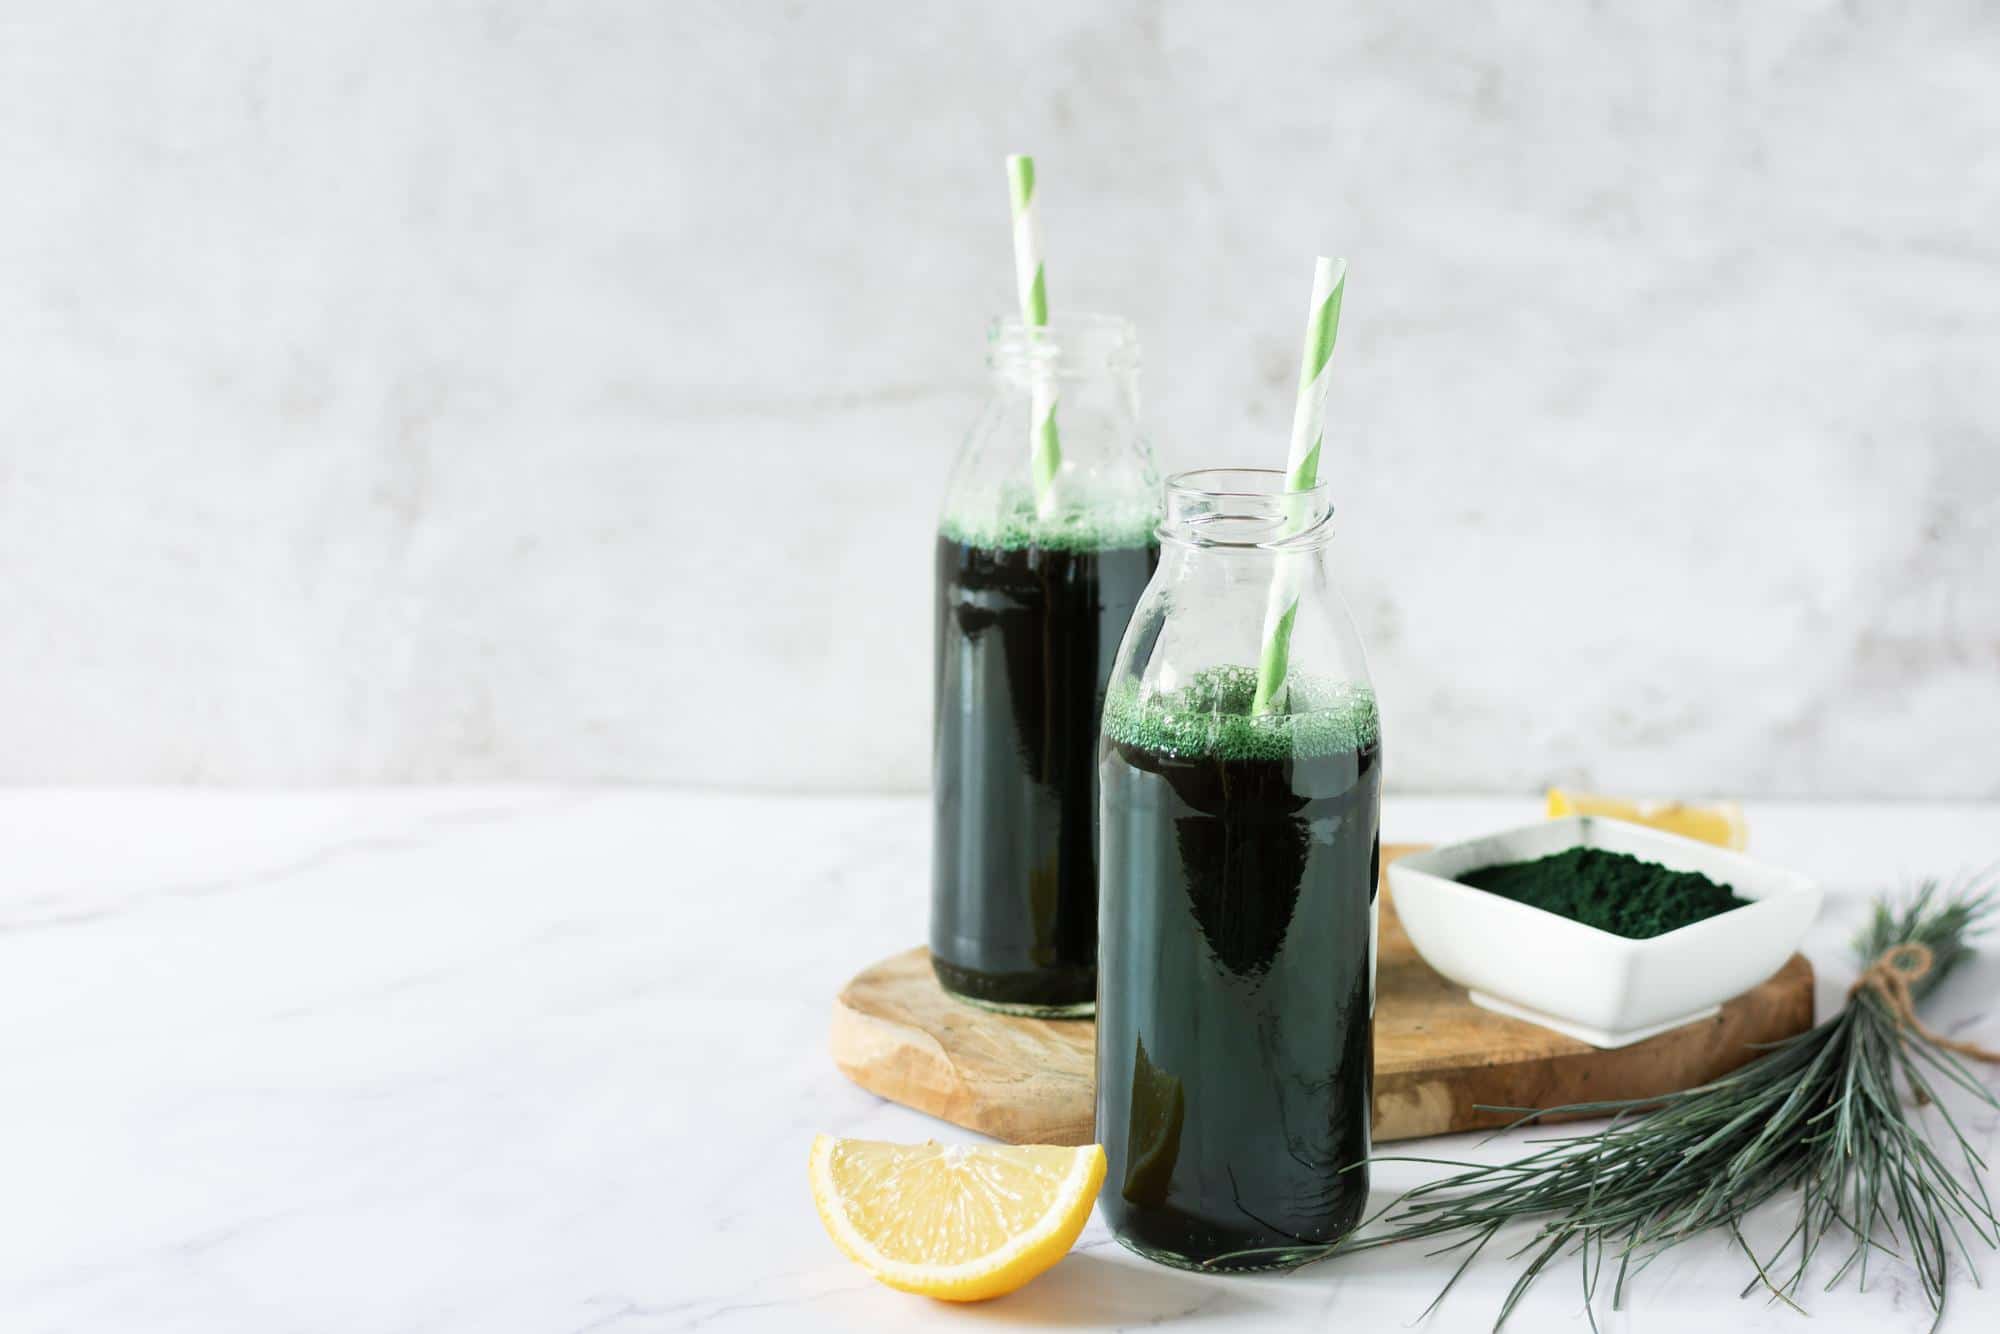 Superfood Spirulina: Exploring the Nutrition and Health Benefits